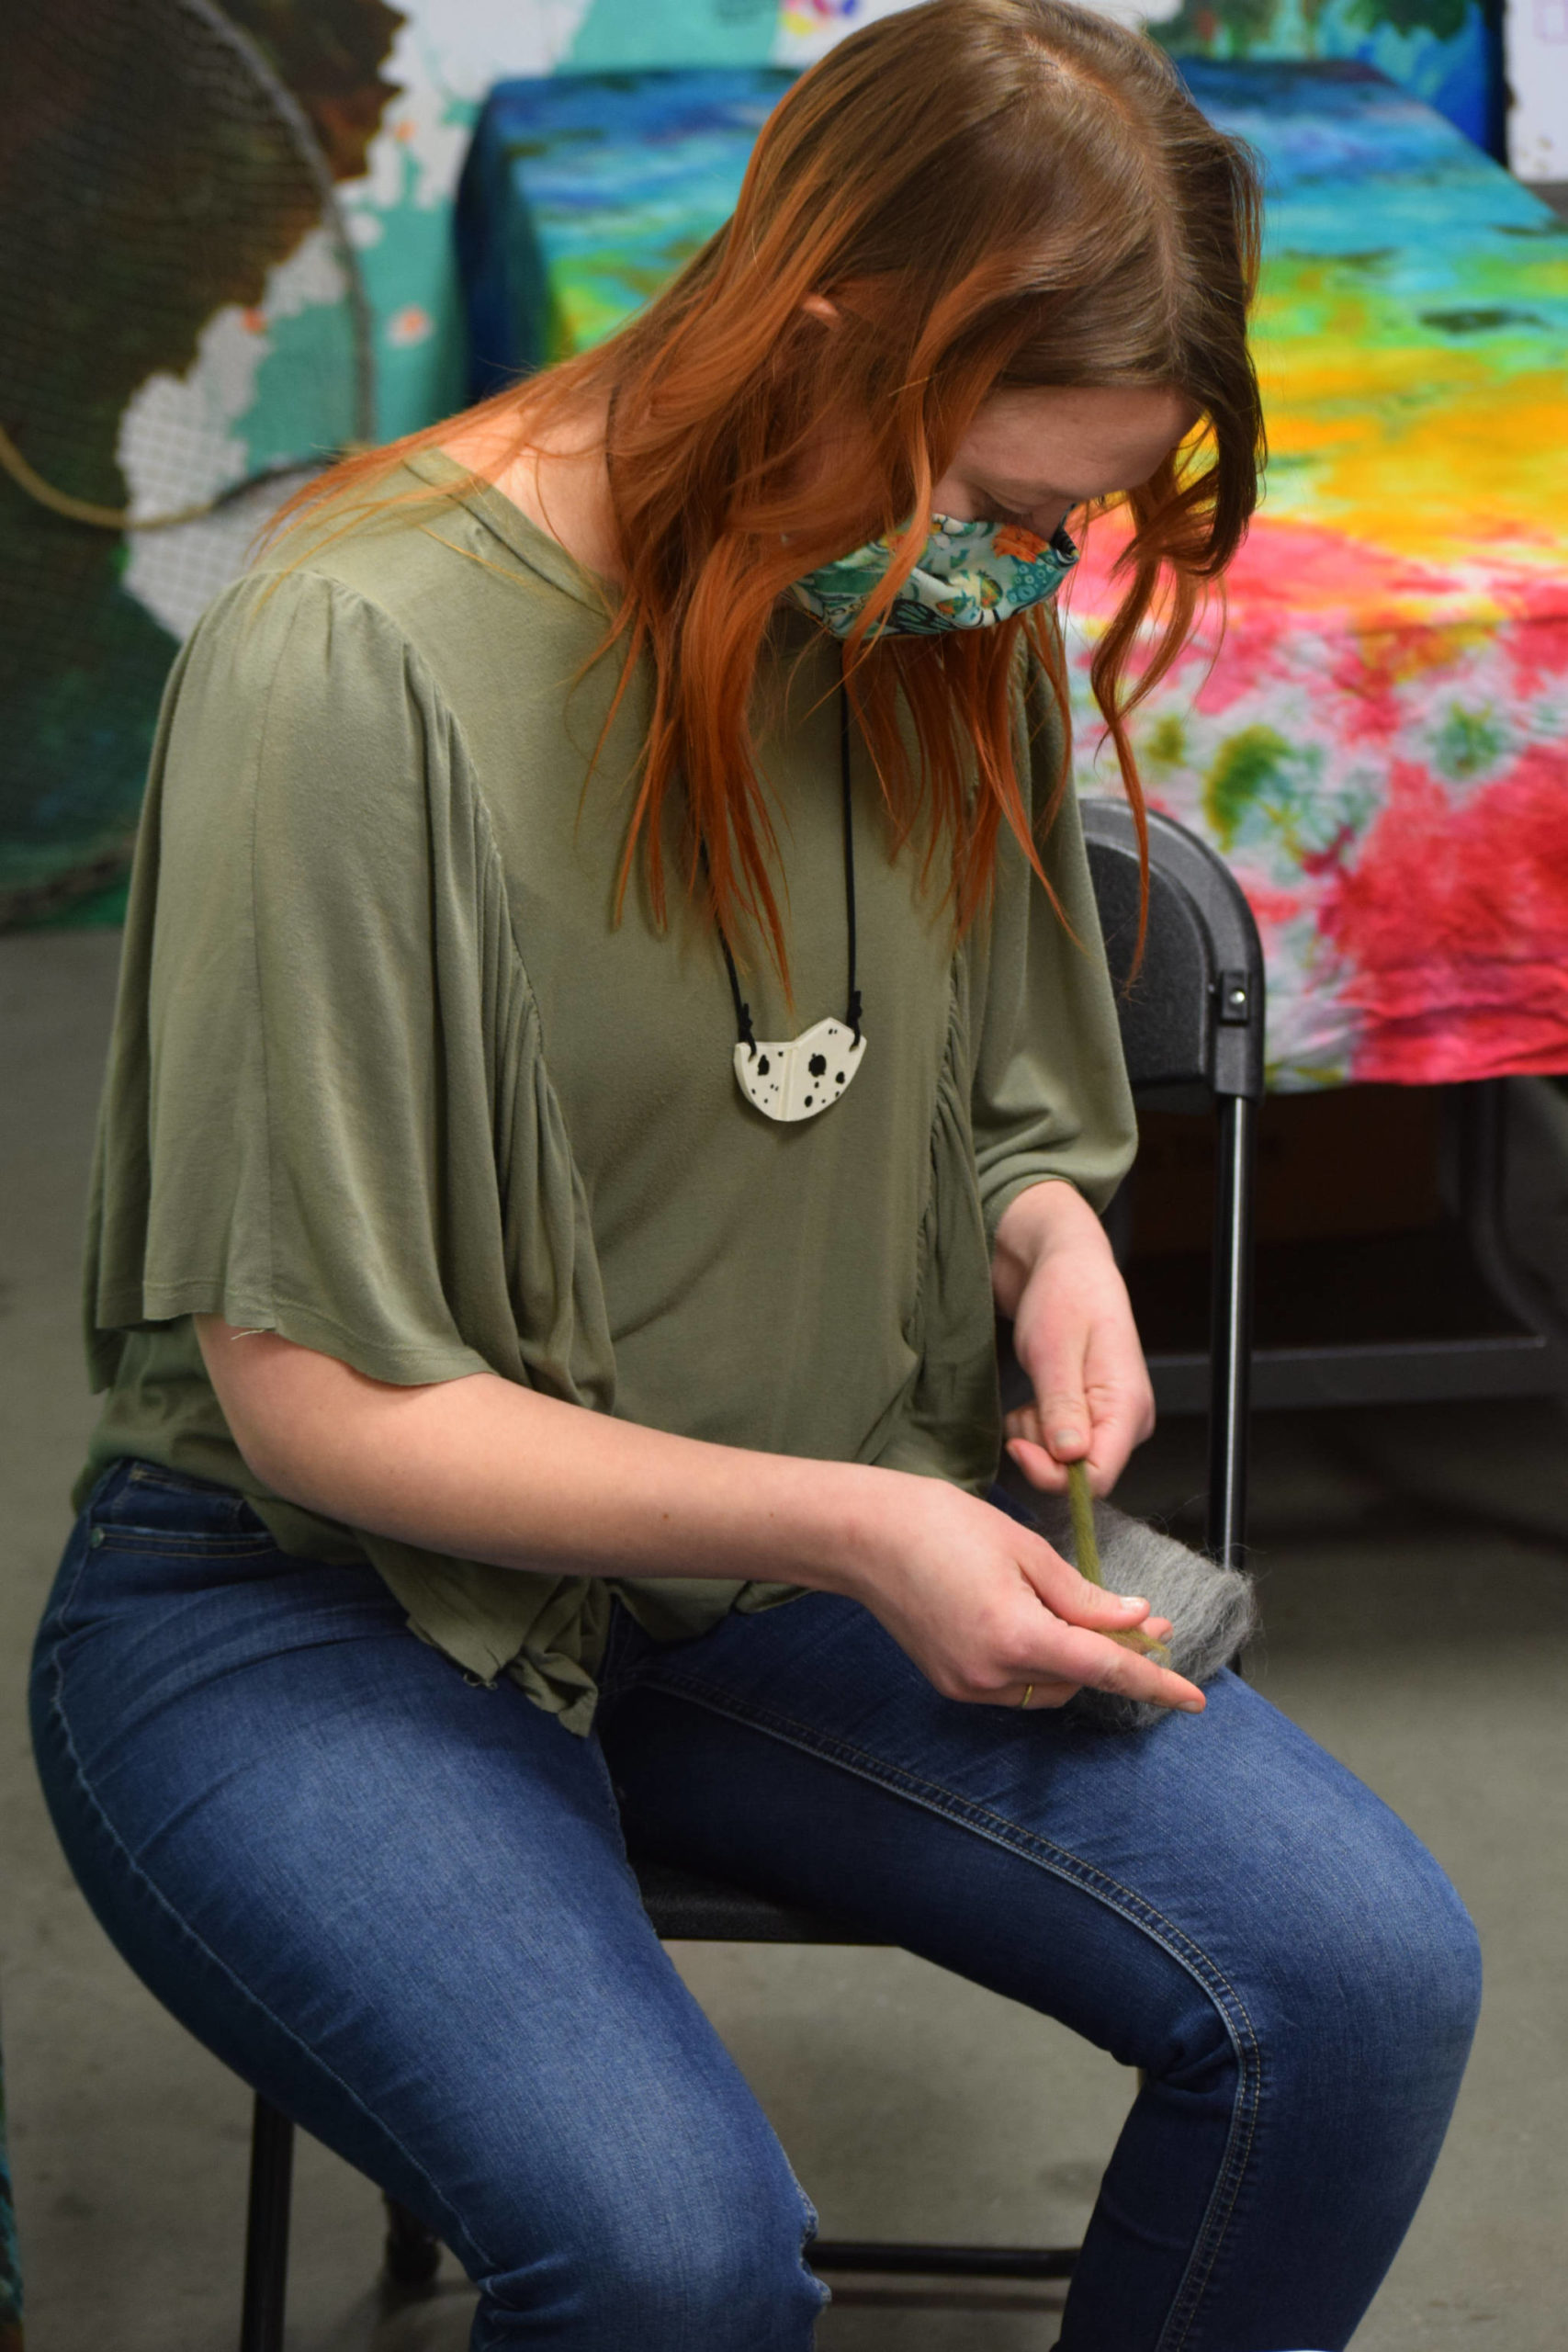 Ana Scollon makes sustainable soap packaging at The Goods store in Soldotna, Alaska, on Friday, April 9, 2021. She is hosting an Earth Day celebration at the zero-waste store Thursday, April 22, 2021 through Saturday, April 24, 2021 from 11 a.m. to 6 p.m. (Photo by Camille Botello)